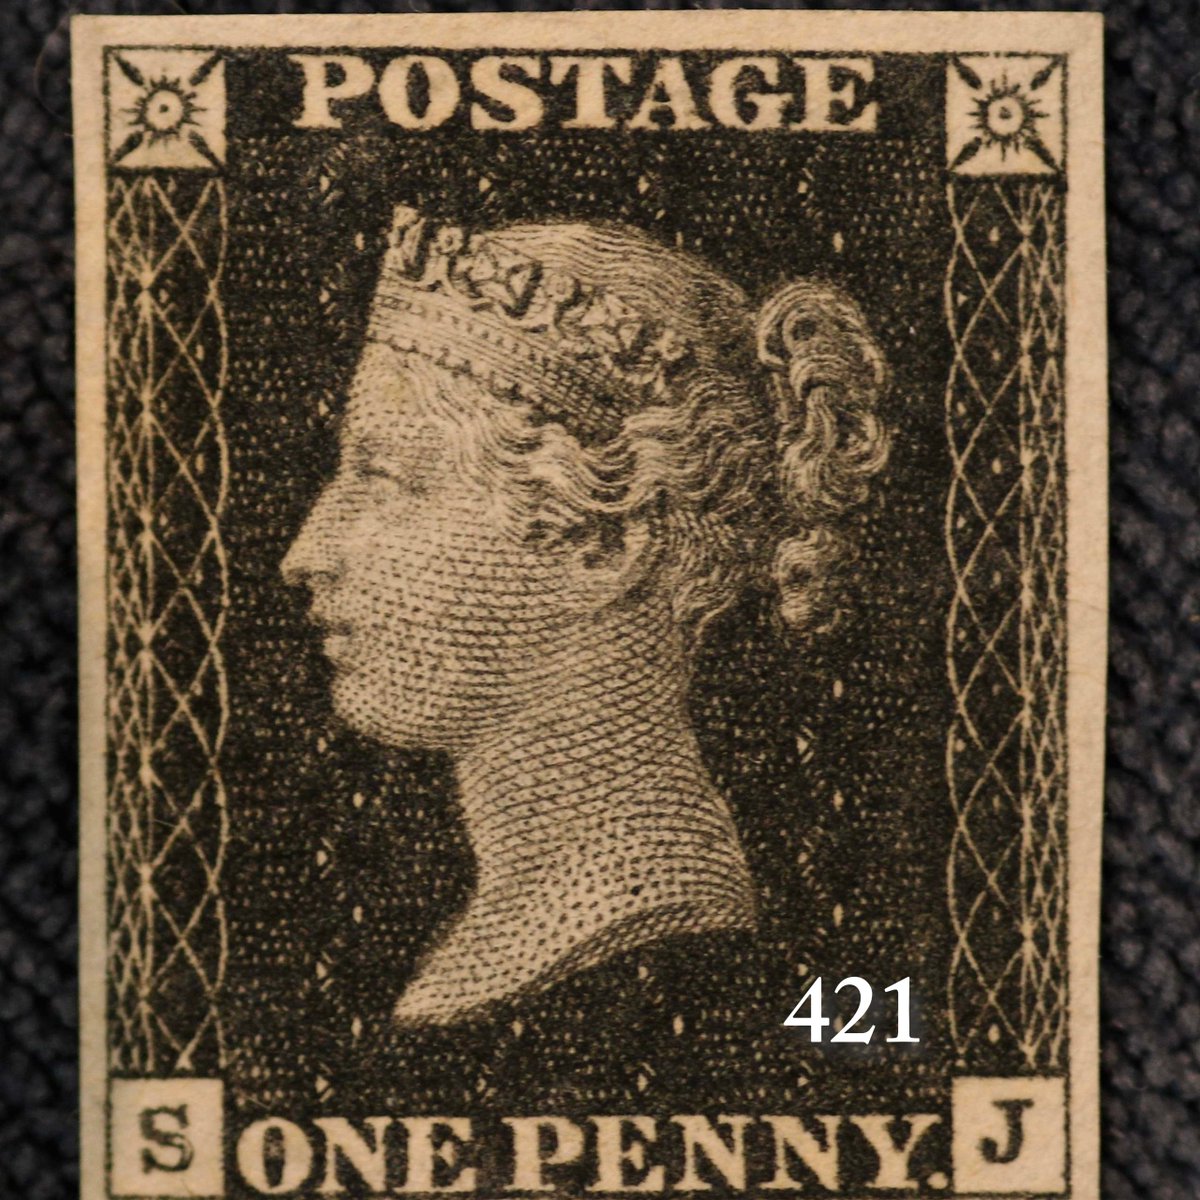 On May 6, 1840, the Penny Black postage stamp became valid for use in the United Kingdom of Great Britain and Ireland. Today also marks 421 days since Cllr Sarah Warren said she wanted a healthy debate on LTNs and how we get around in Bath. She won't get our stamp of approval.